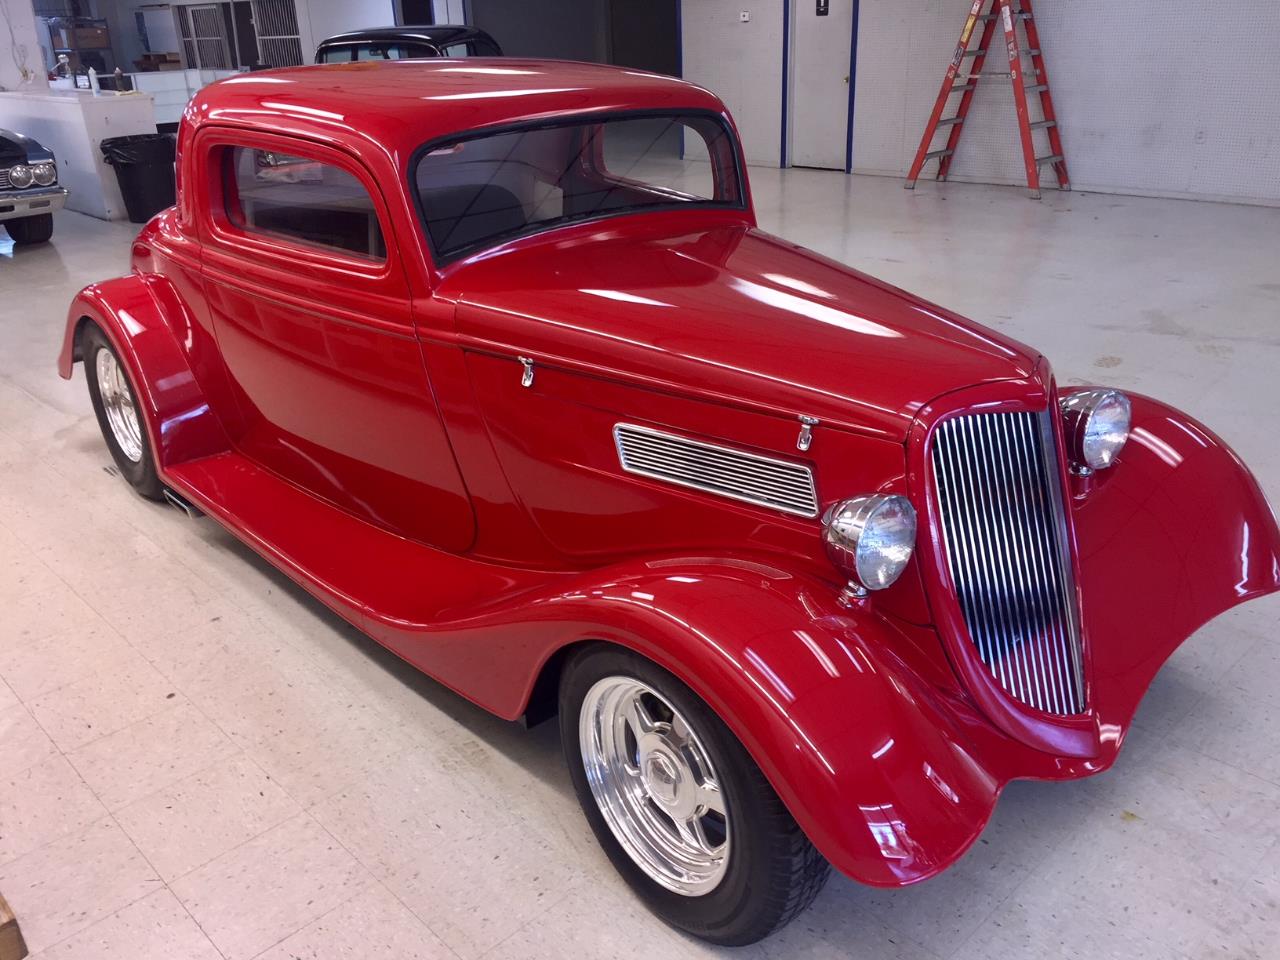 1934 Ford Coupe for Sale | www.waldenwongart.com | CC-1155311